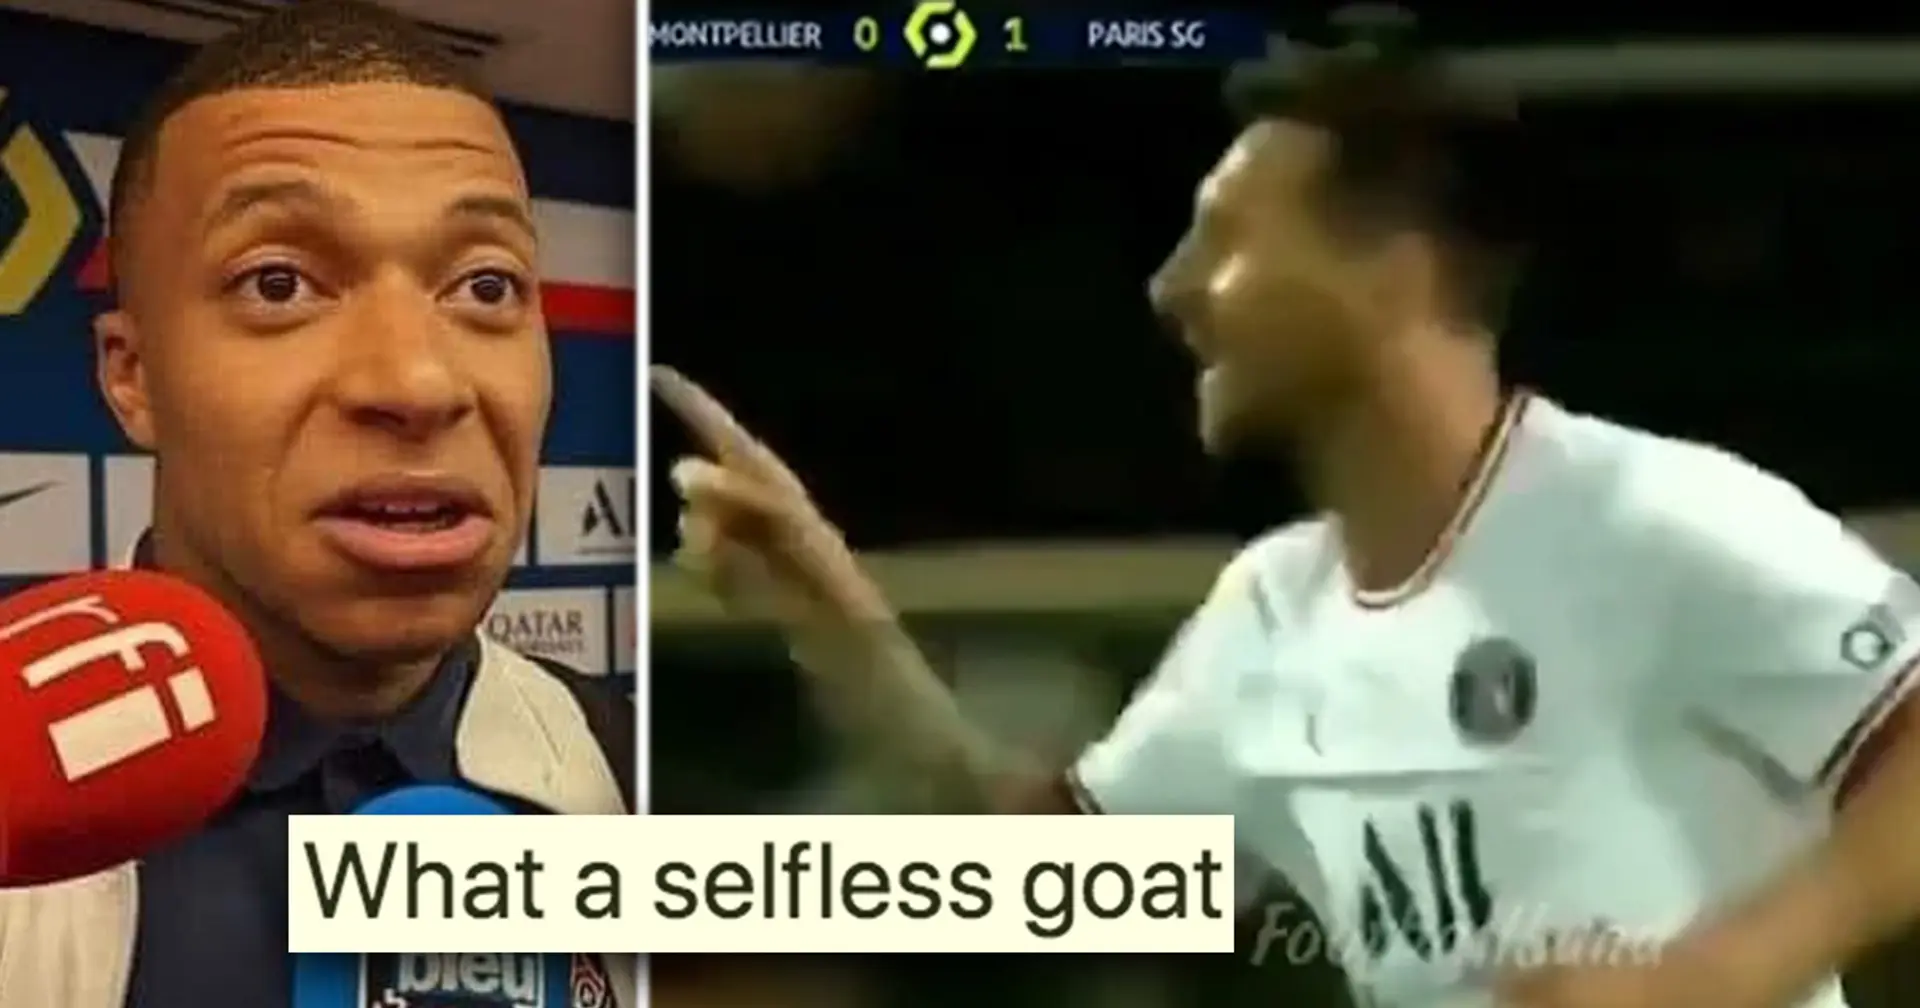 'He just doesn't need shameless statpadding': Fans react to Messi's amazing gesture for Mbappe v Montpellier